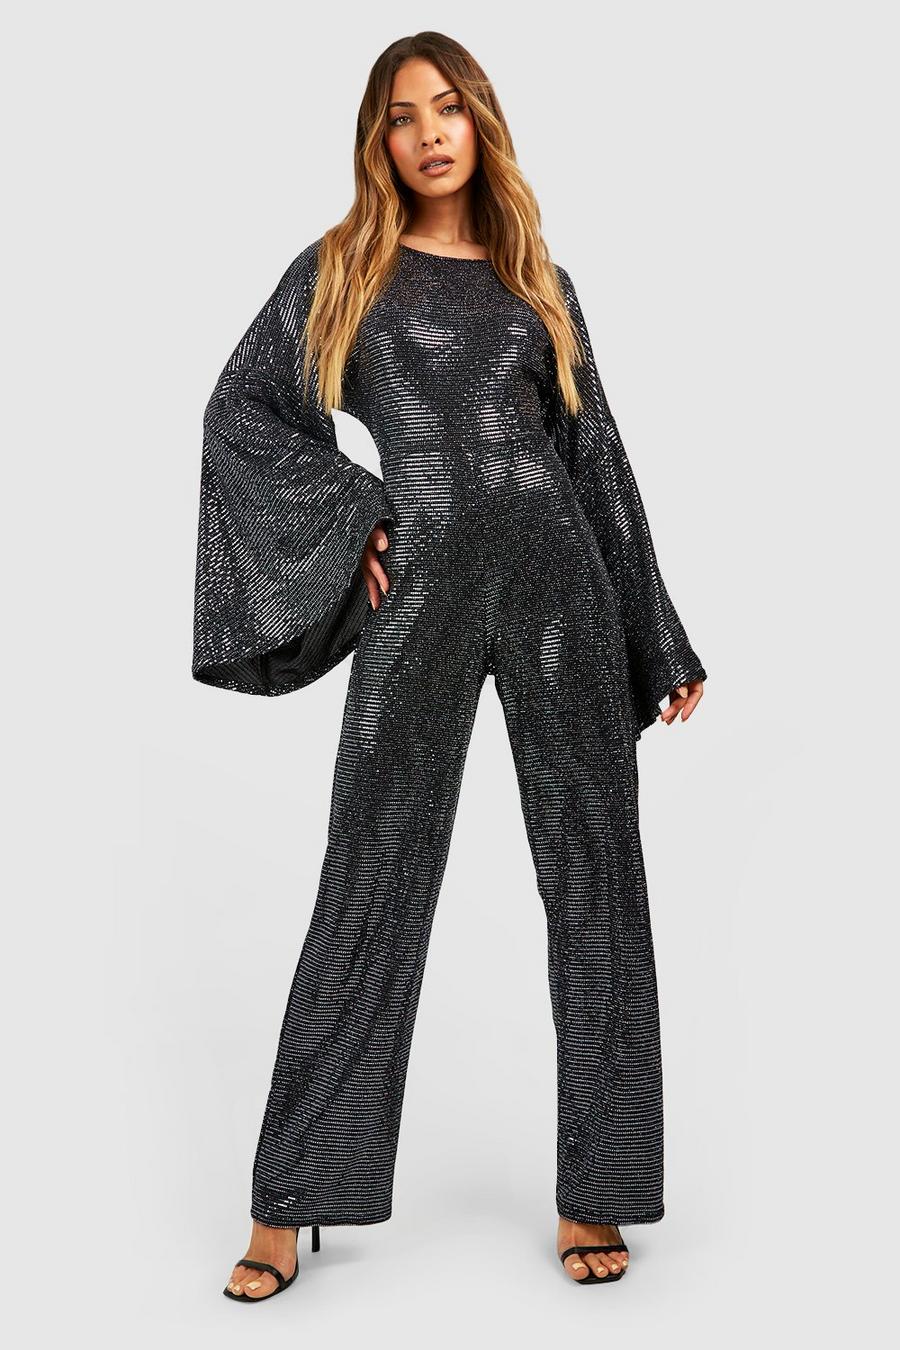 Charcoal grey Sequin Extreme Flare Sleeve Jumpsuit